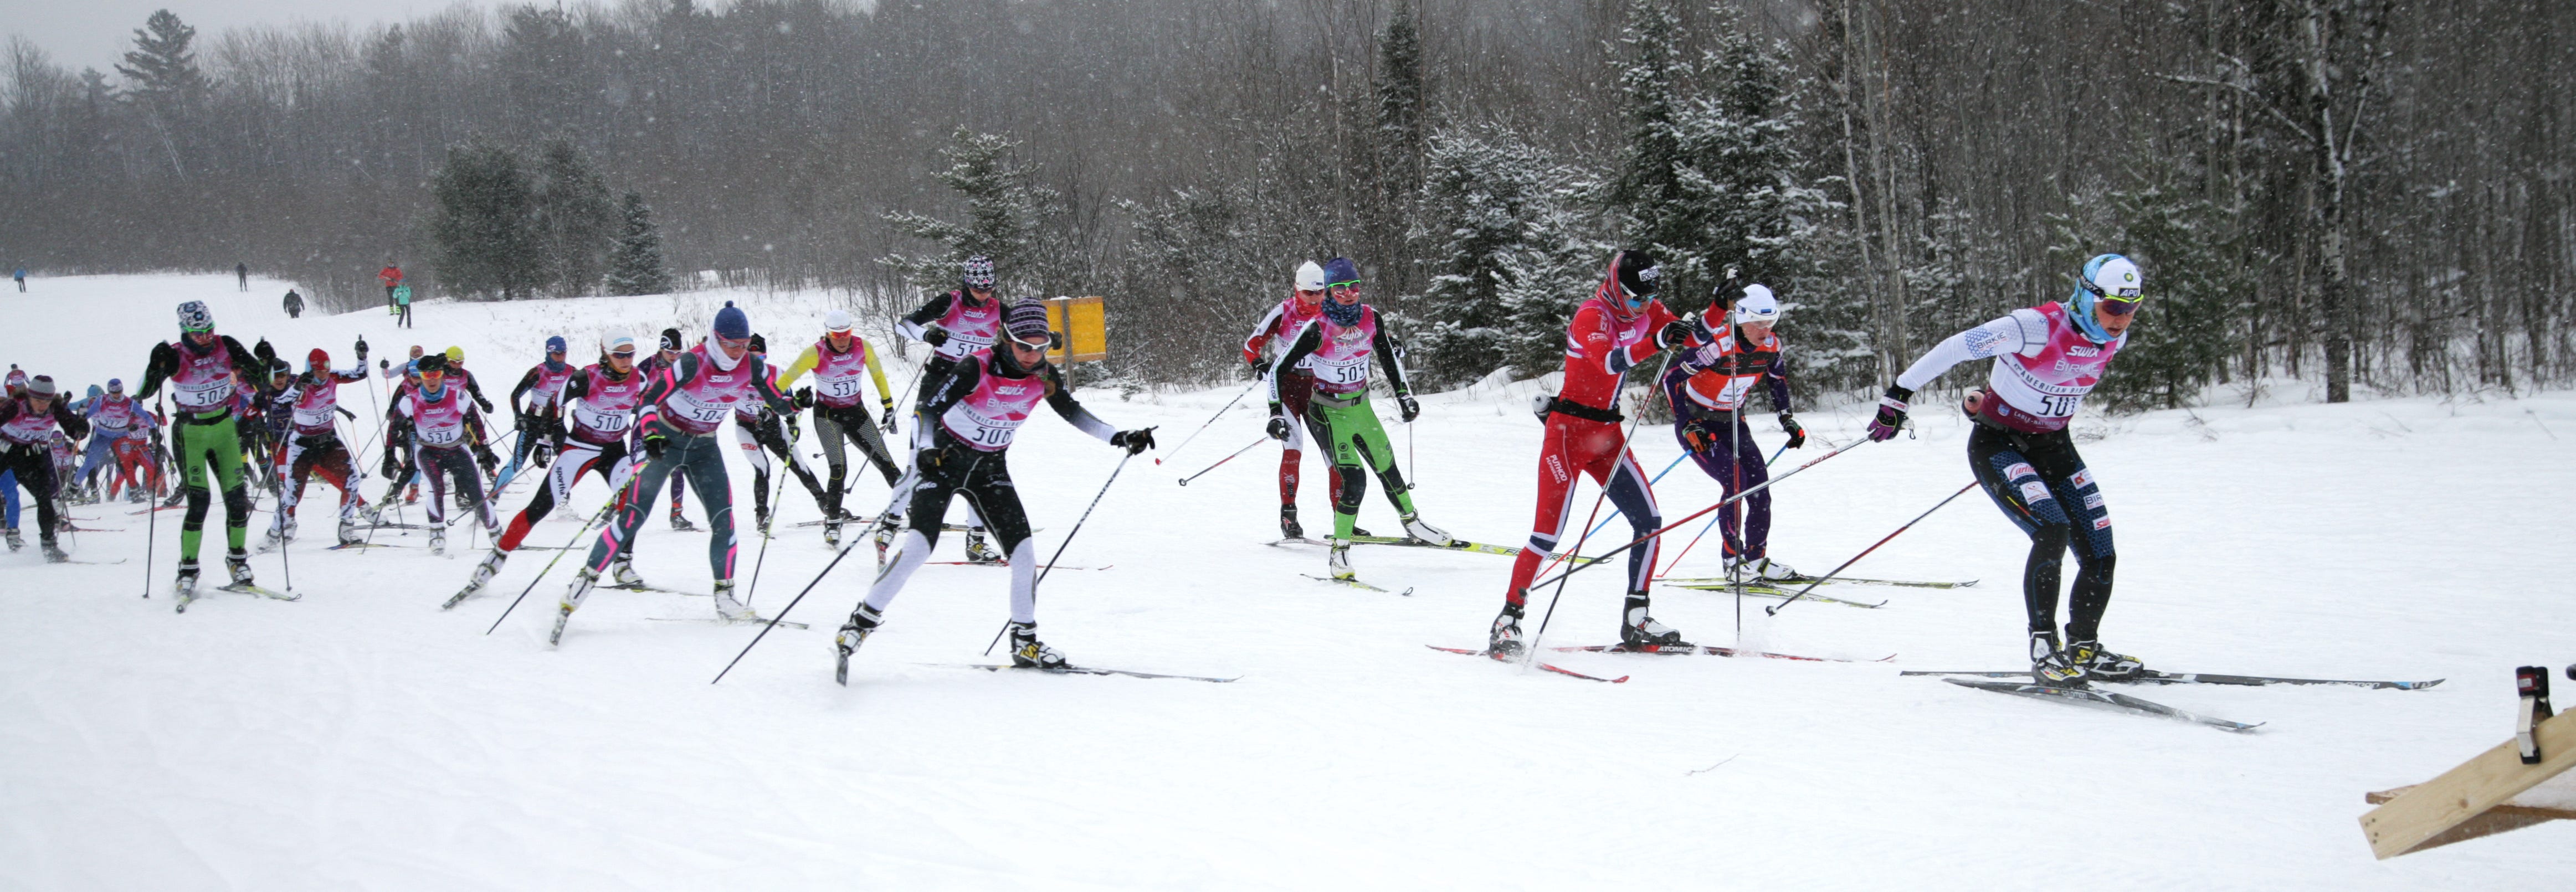 Holly Brooks, right, leads a group of skiers early in the women's division of the American Birkebeiner cross-country ski race on Feb. 21, 2015, in Cable. Brooks won the race.